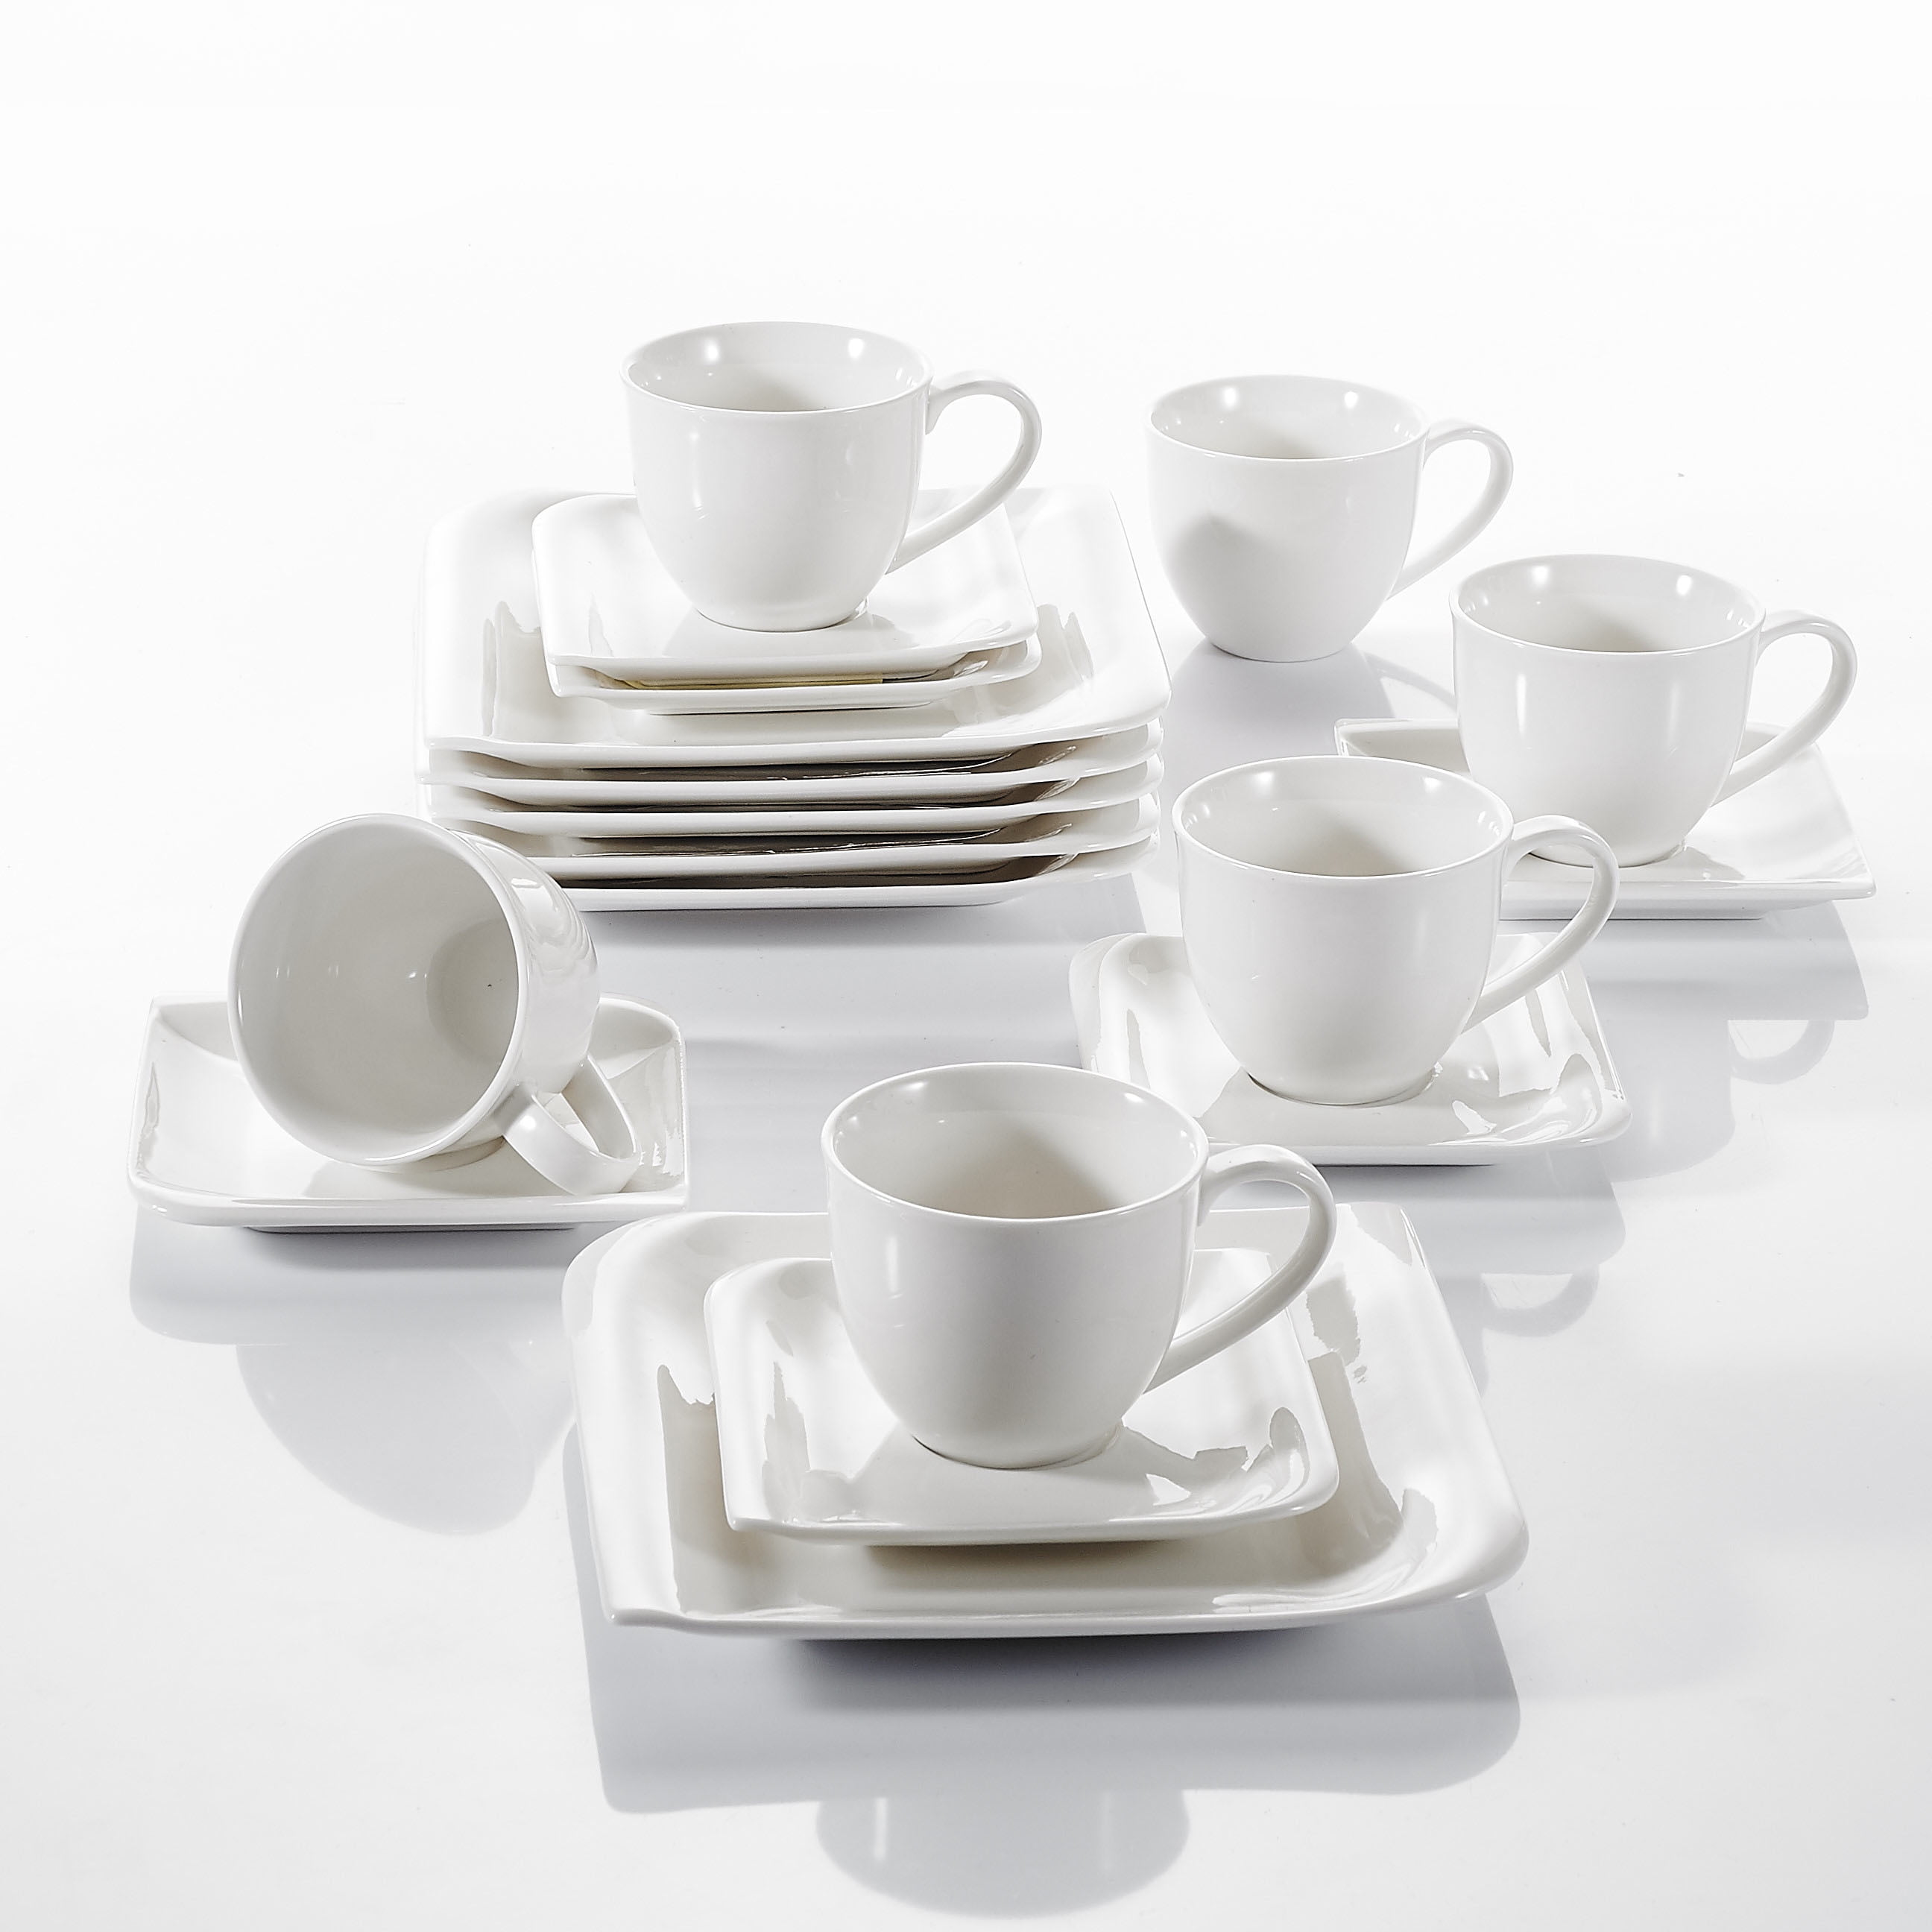 Service for 6 Persons Vancasso Ivory White 18-Piece Fine Stoneware Coffee Sets Porcelain Afternoon Tea Sets with Cups Saucers Set and Dessert Plates 